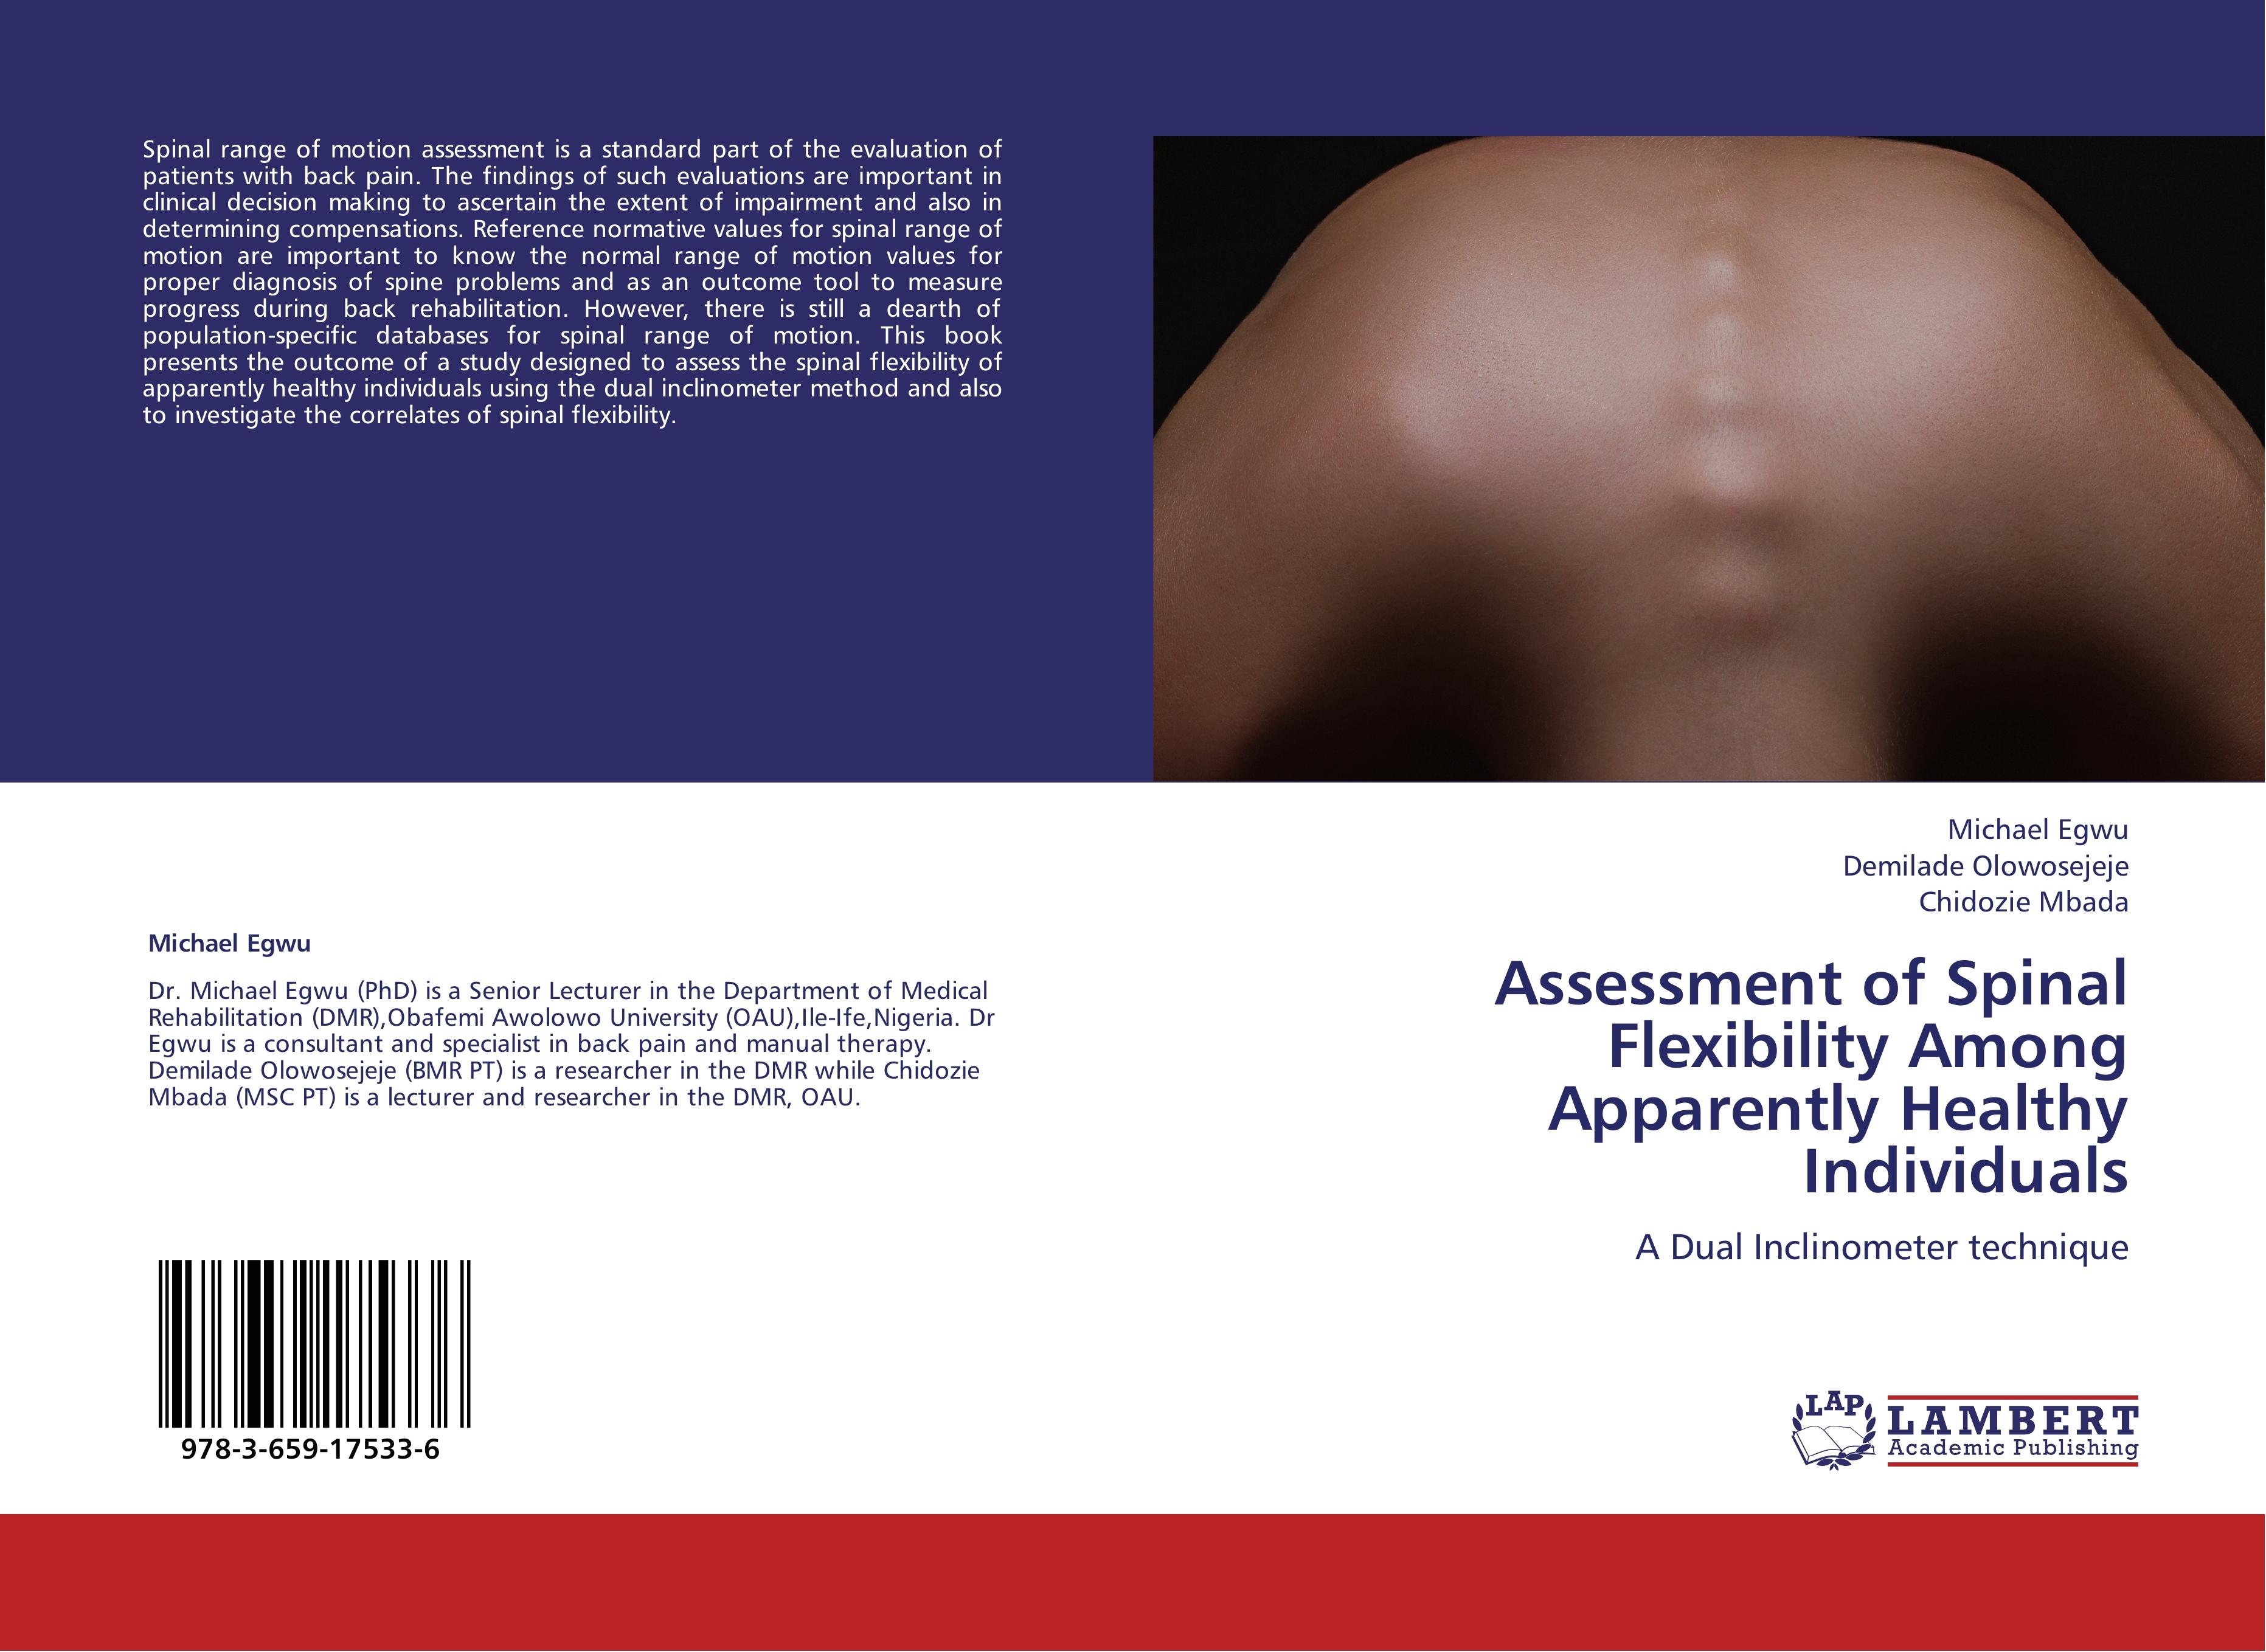 Assessment of Spinal Flexibility Among Apparently Healthy Individuals - Michael Egwu Demilade Olowosejeje Chidozie Mbada